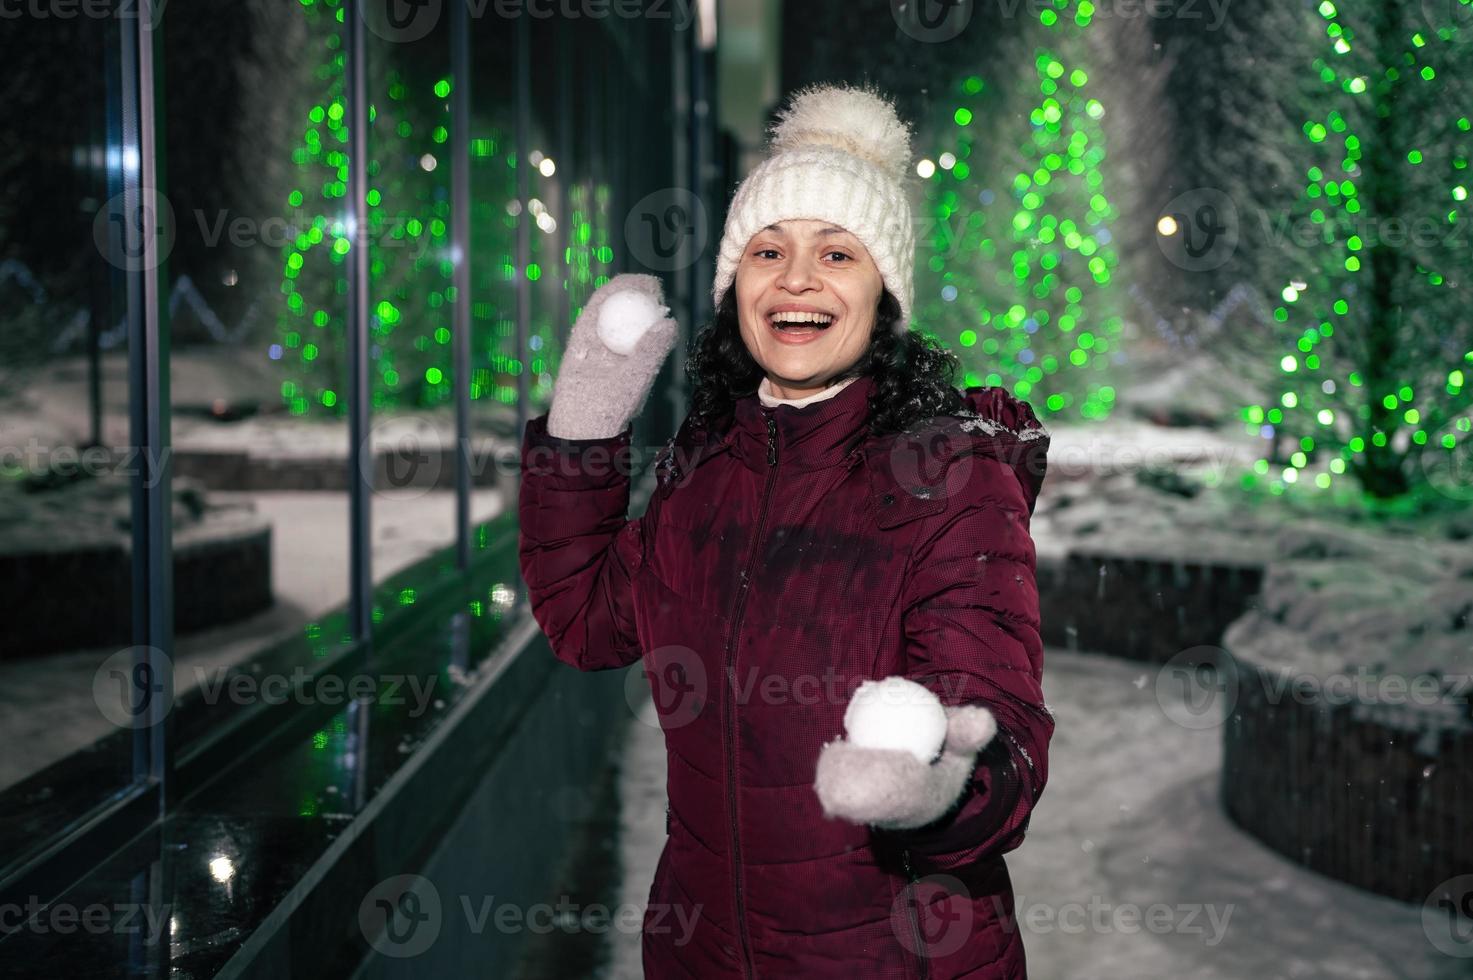 Pretty woman plays with snowballs on winter snowy evening, on street lightened by garlands. Winter fun - snowball fight photo